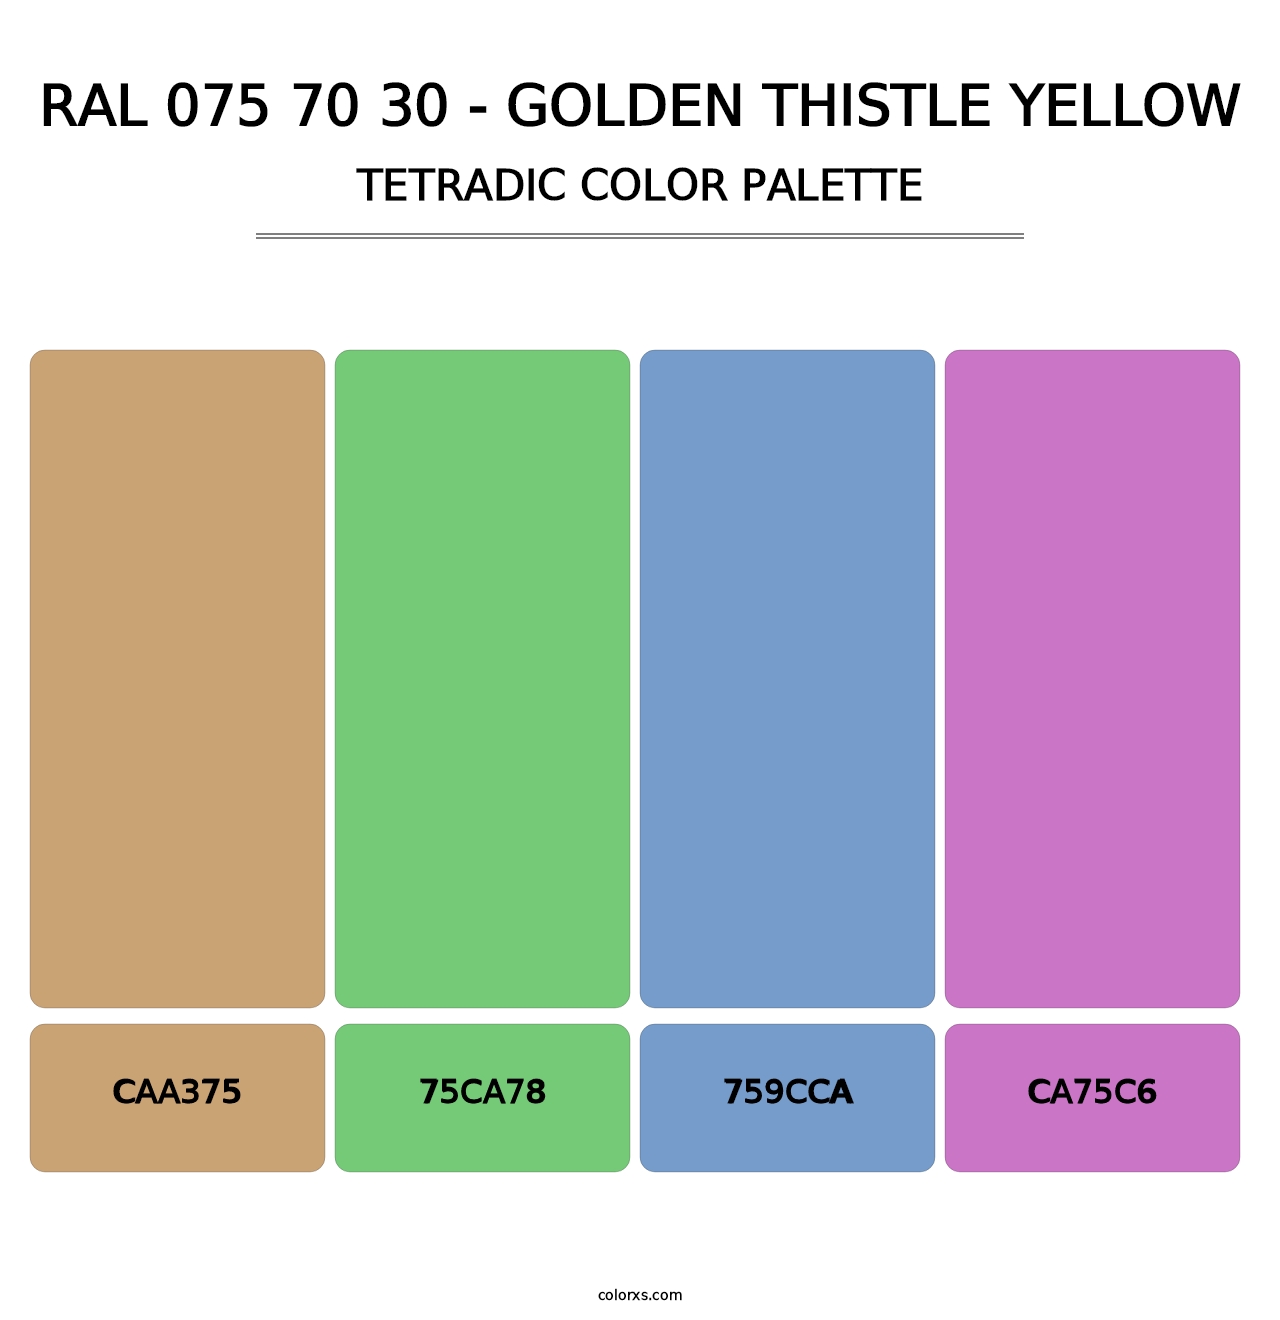 RAL 075 70 30 - Golden Thistle Yellow - Tetradic Color Palette